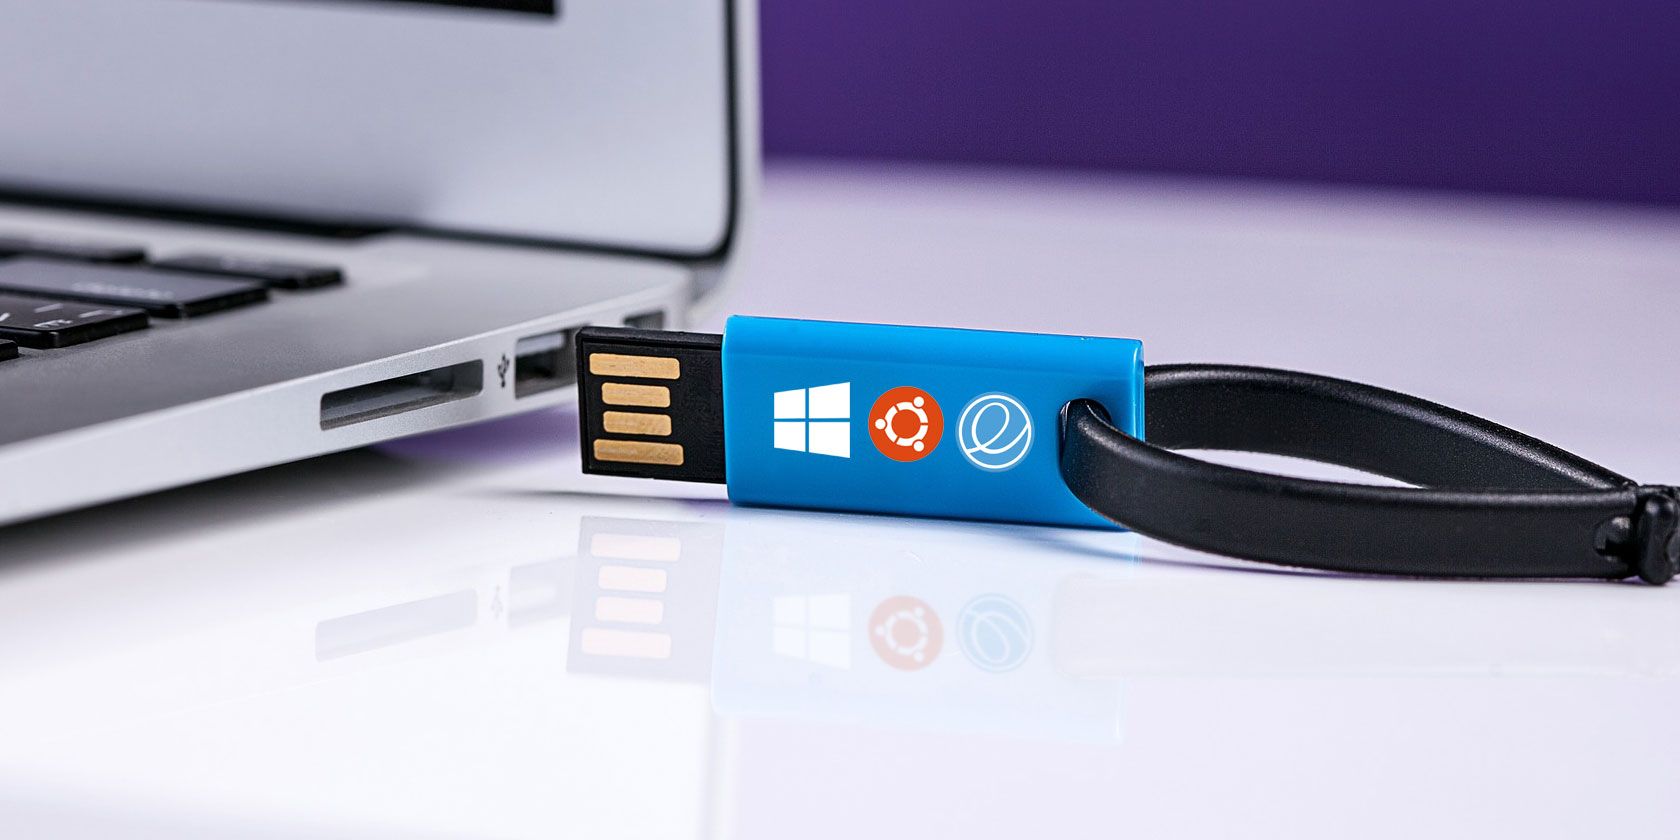 How to Install Bootable Operating Systems on USB Stick